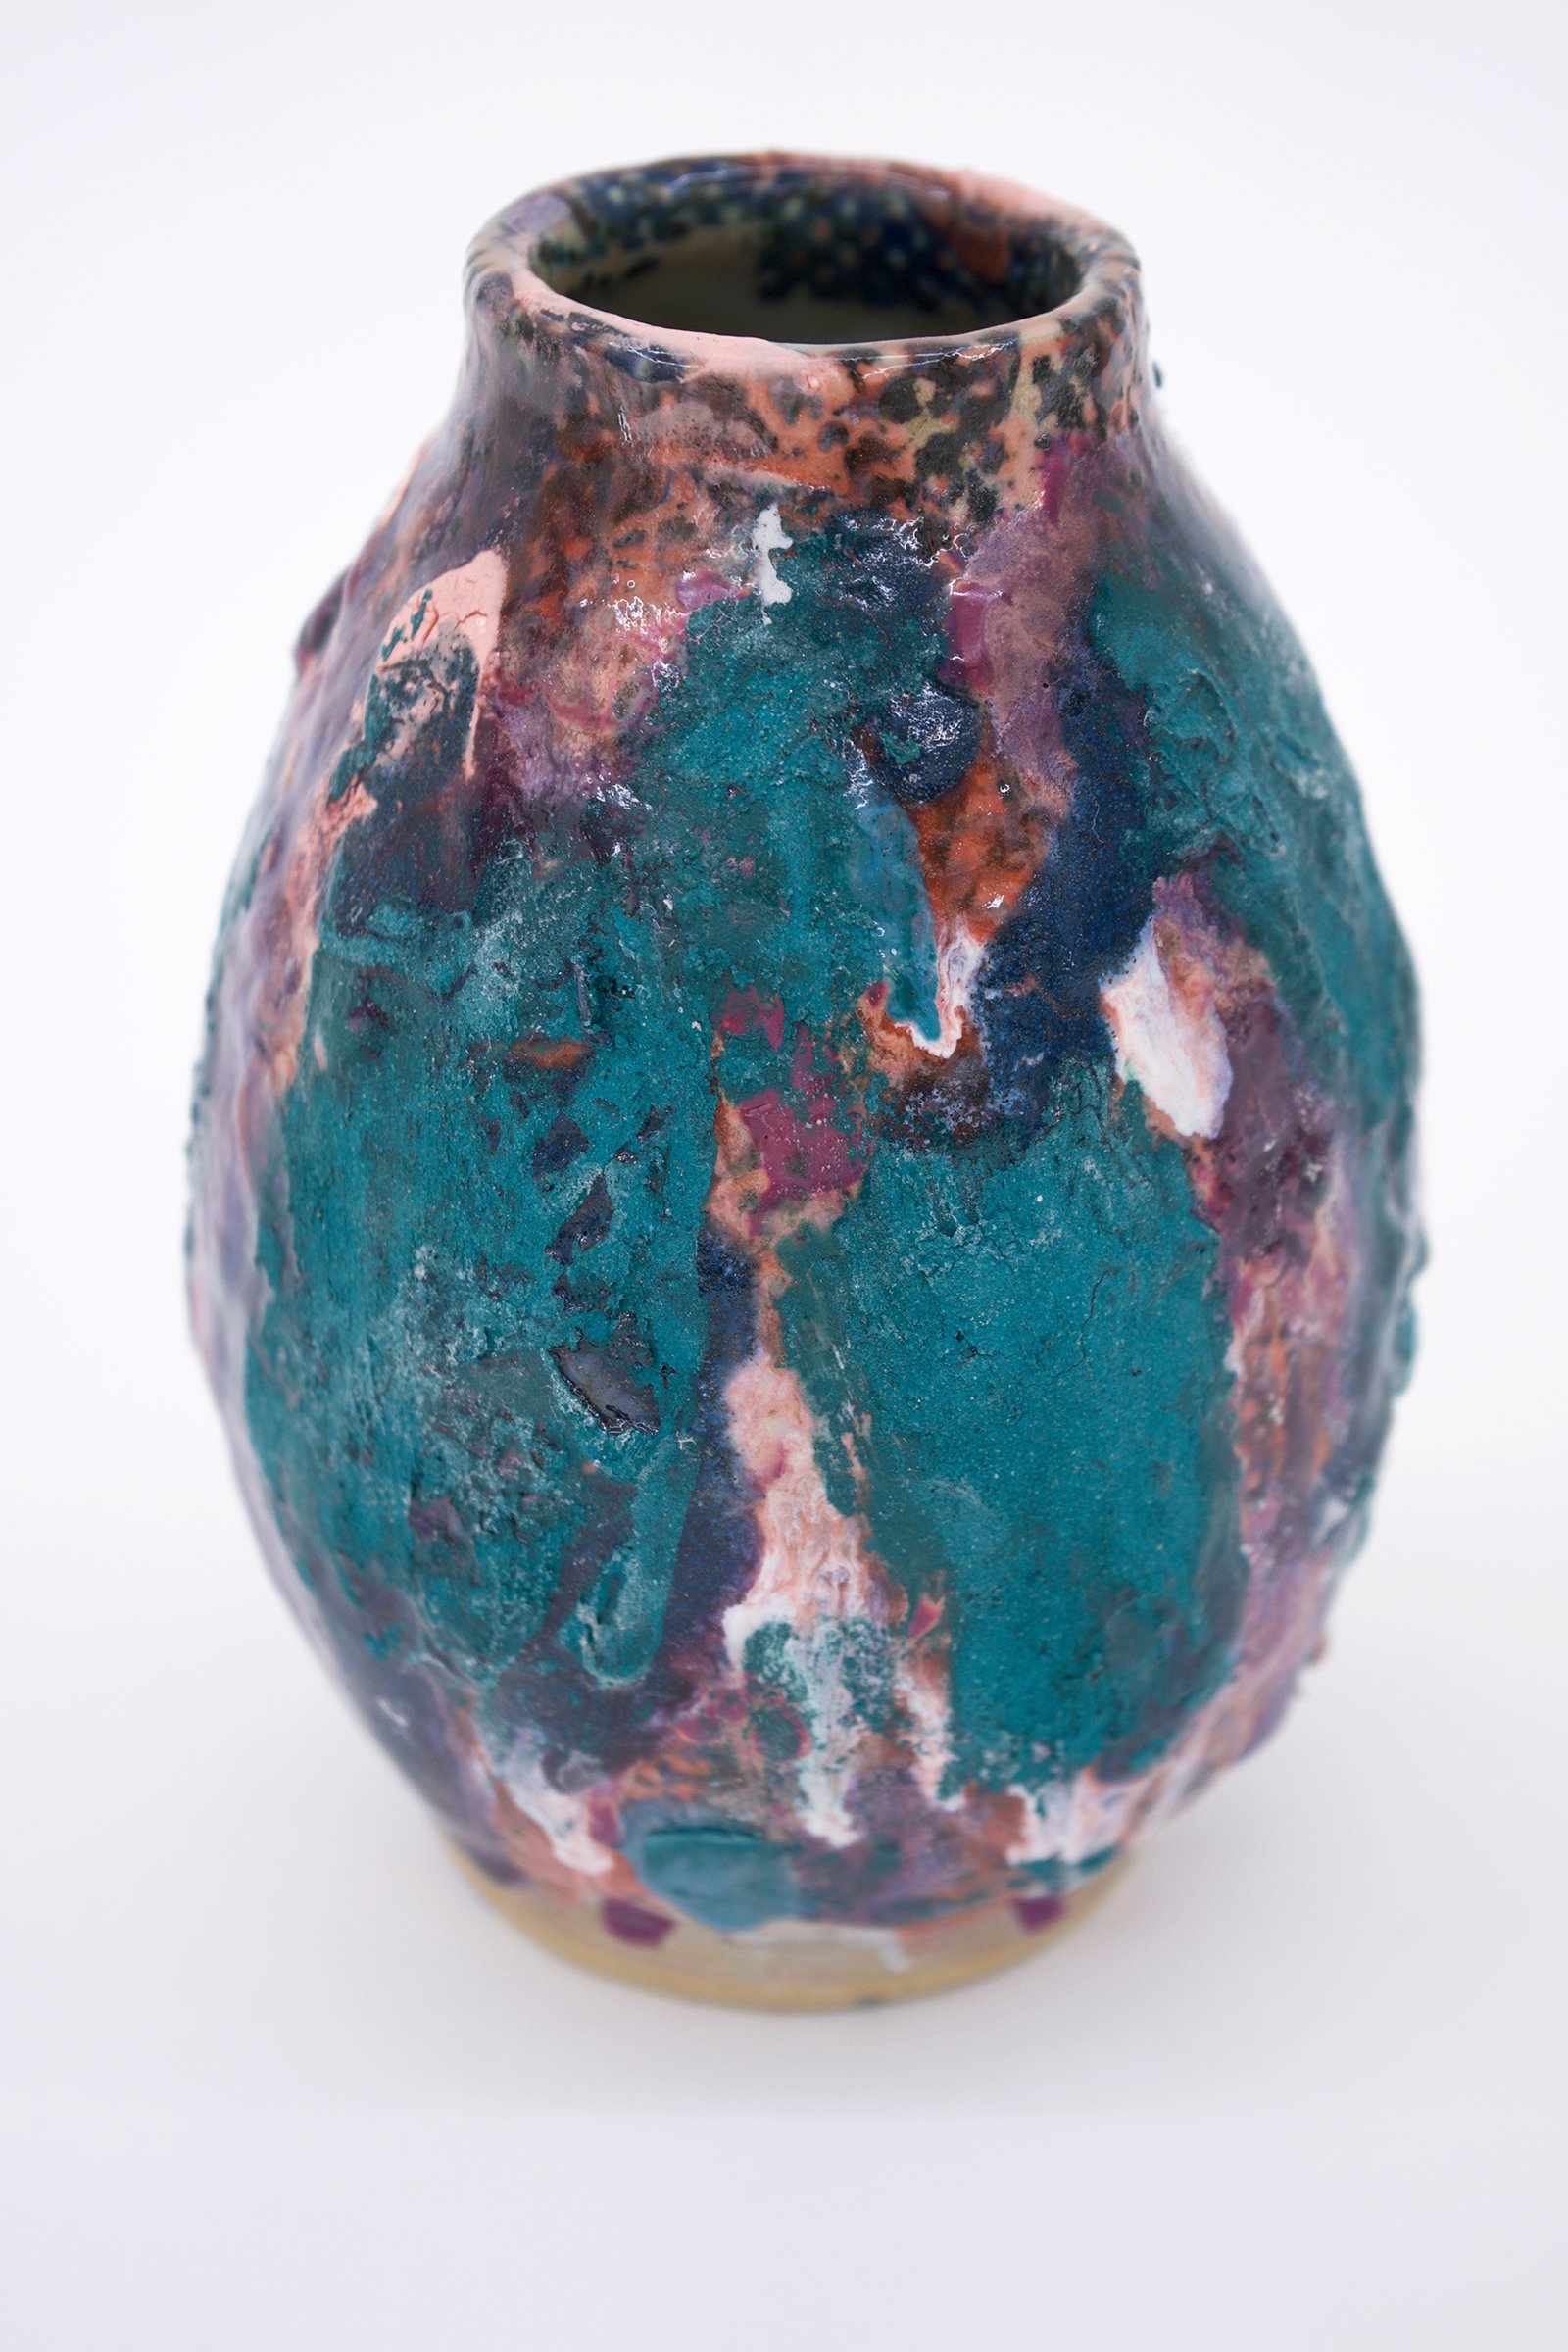   Untitled (Lava Lamps, Mid 1) , 2022 Multiply fired and layered glazes on stoneware 6.5” x 4” 